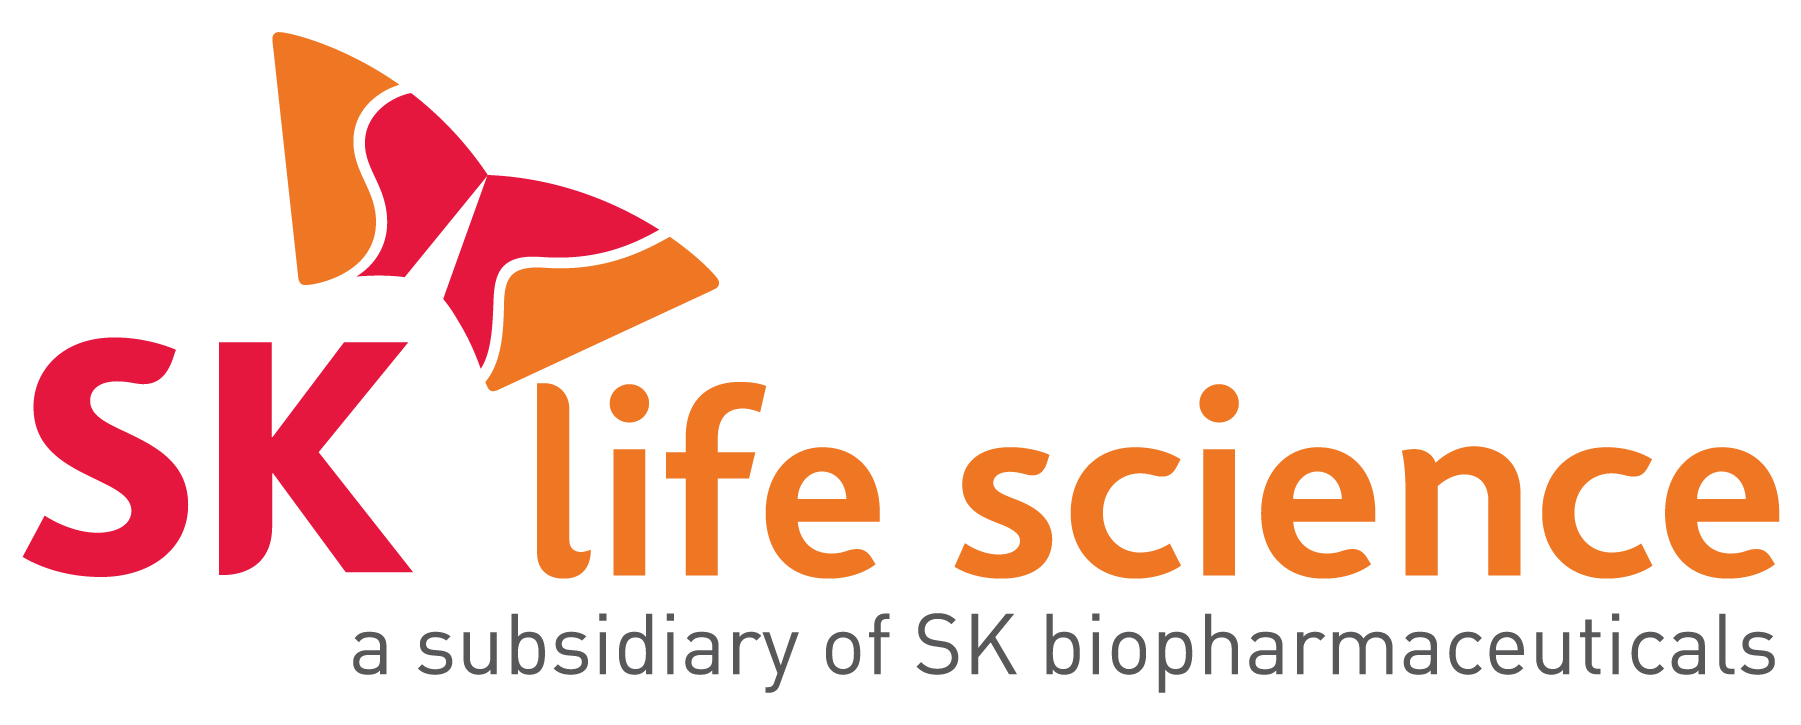 Home - SK Life Science, Inc.